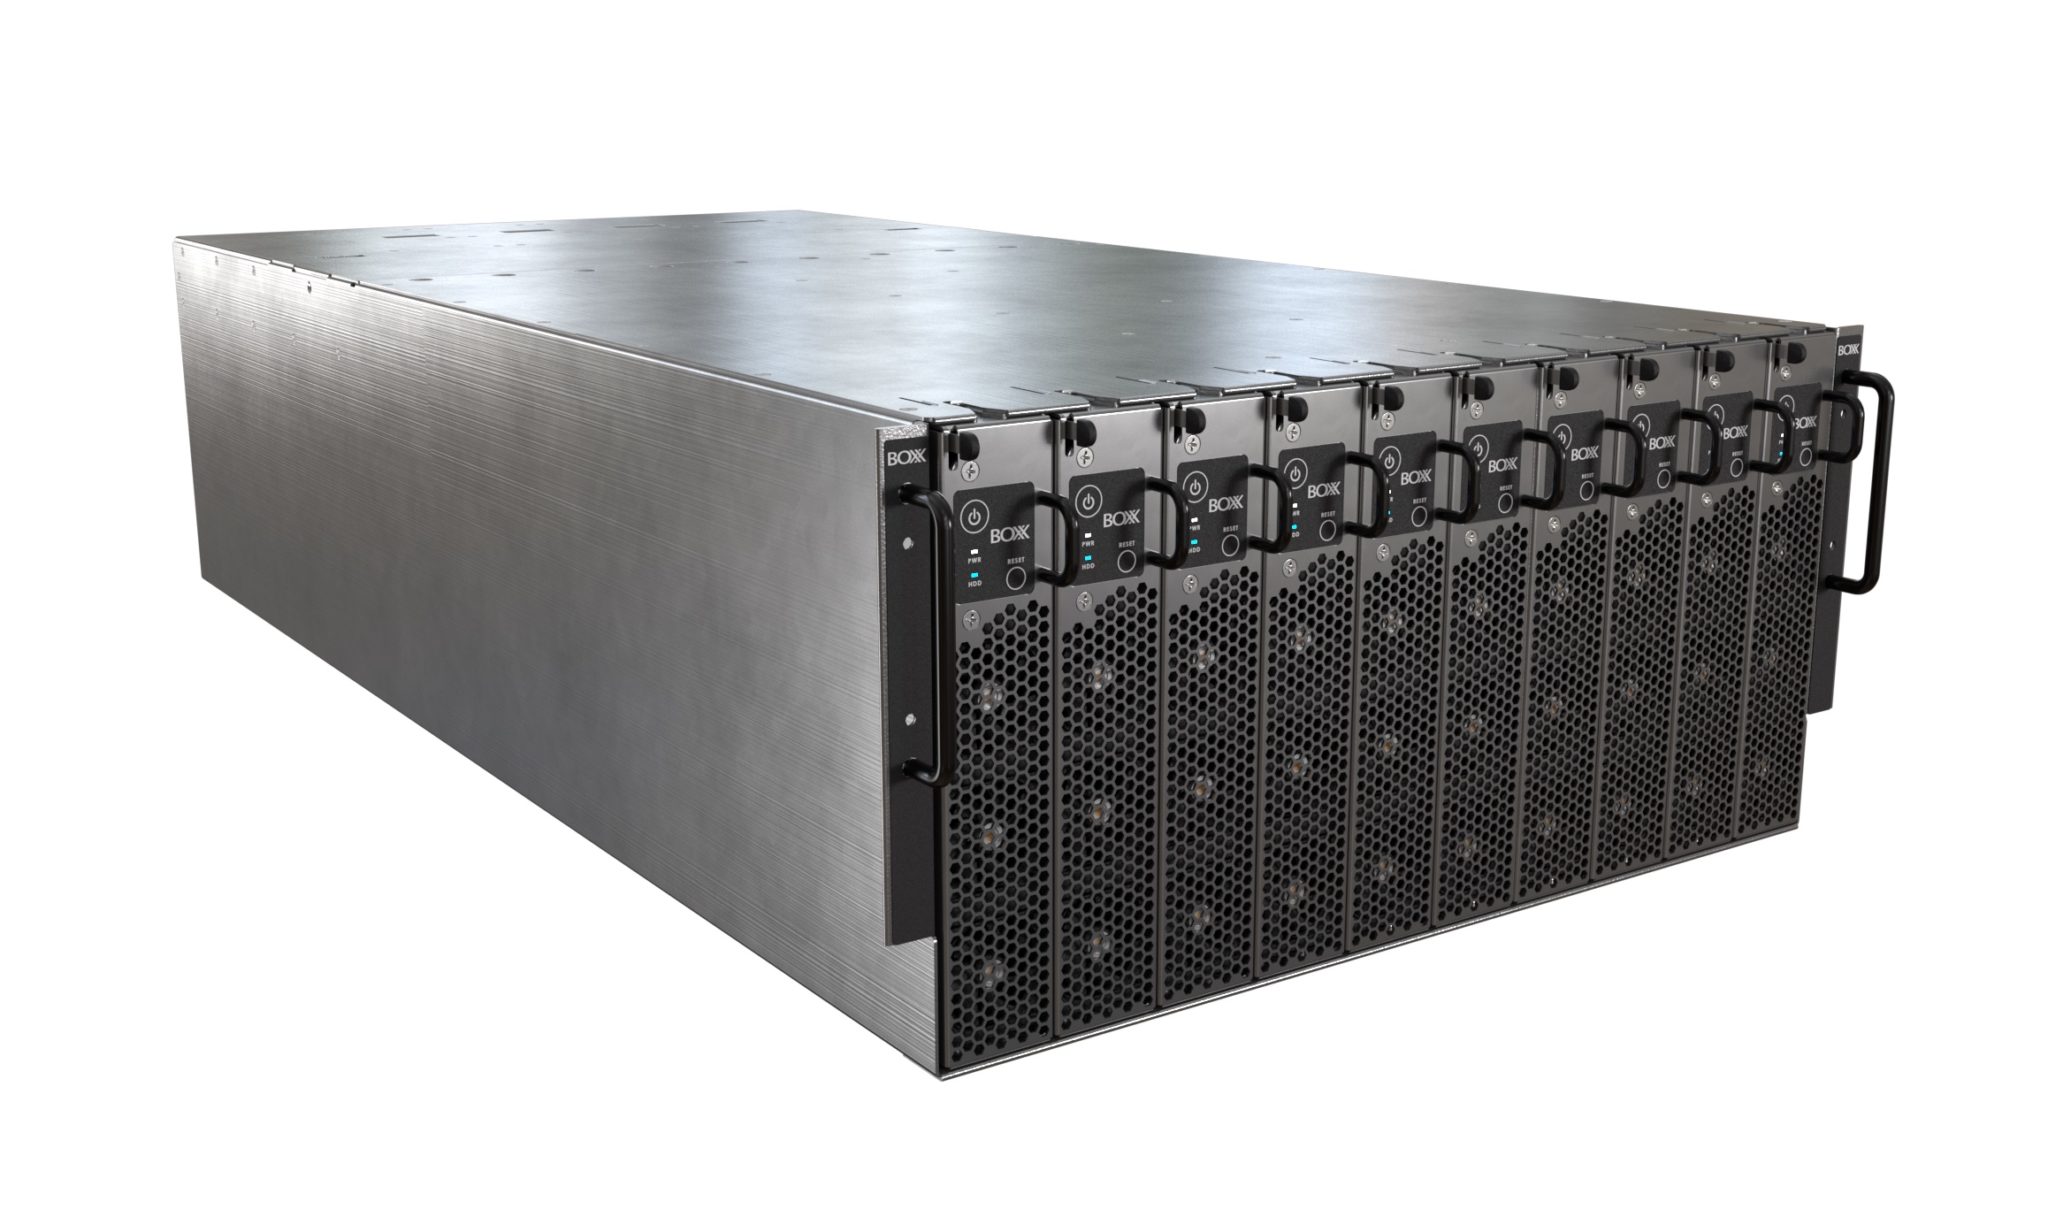 BOXX Systems Releases New NVIDIA Omniverse Enterprise Systems